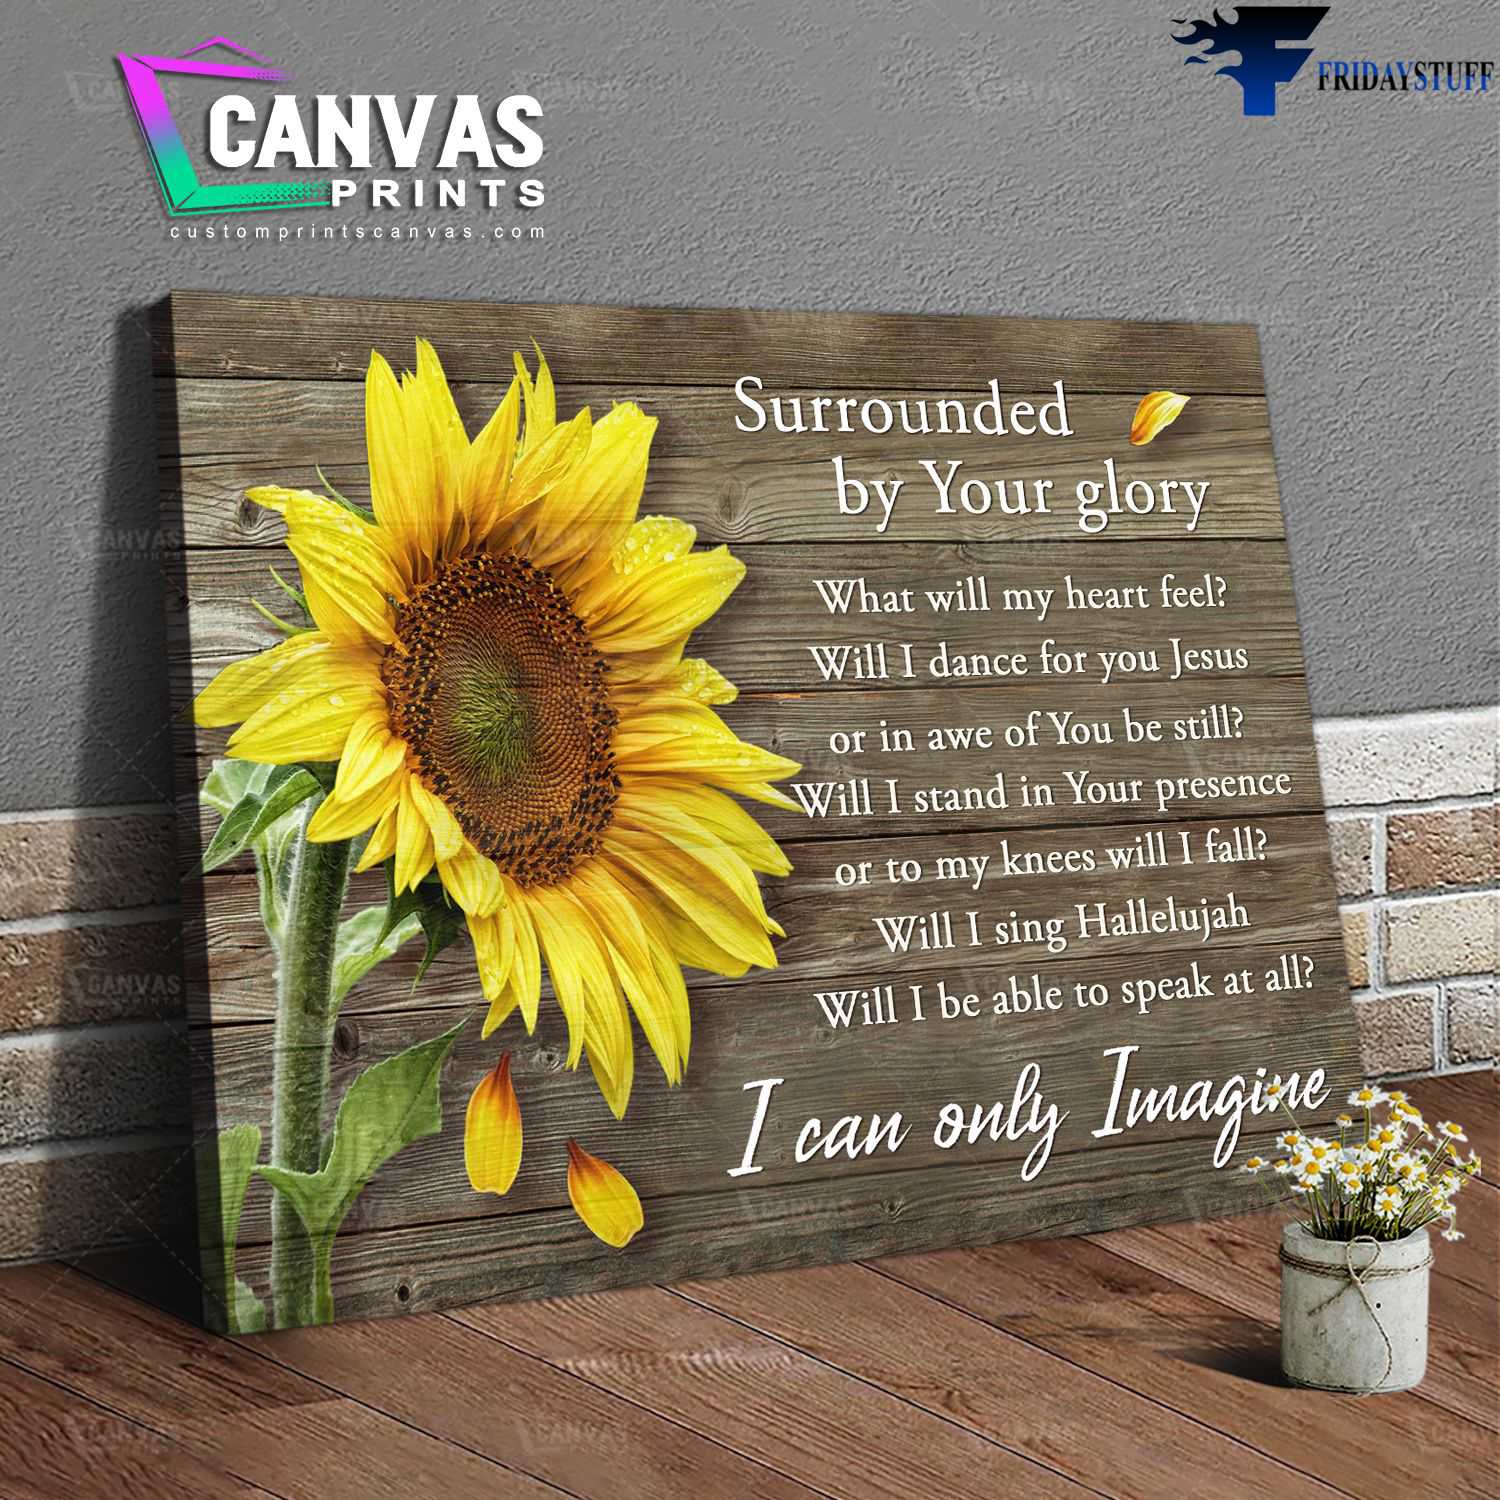 Sunflower Lover, Wall Poster - Surrounded By Your Glory, What Will My Heart Feel, Will I Dance For You Jesus, Or In Awe Of You Be Still, I Can Only Imagine